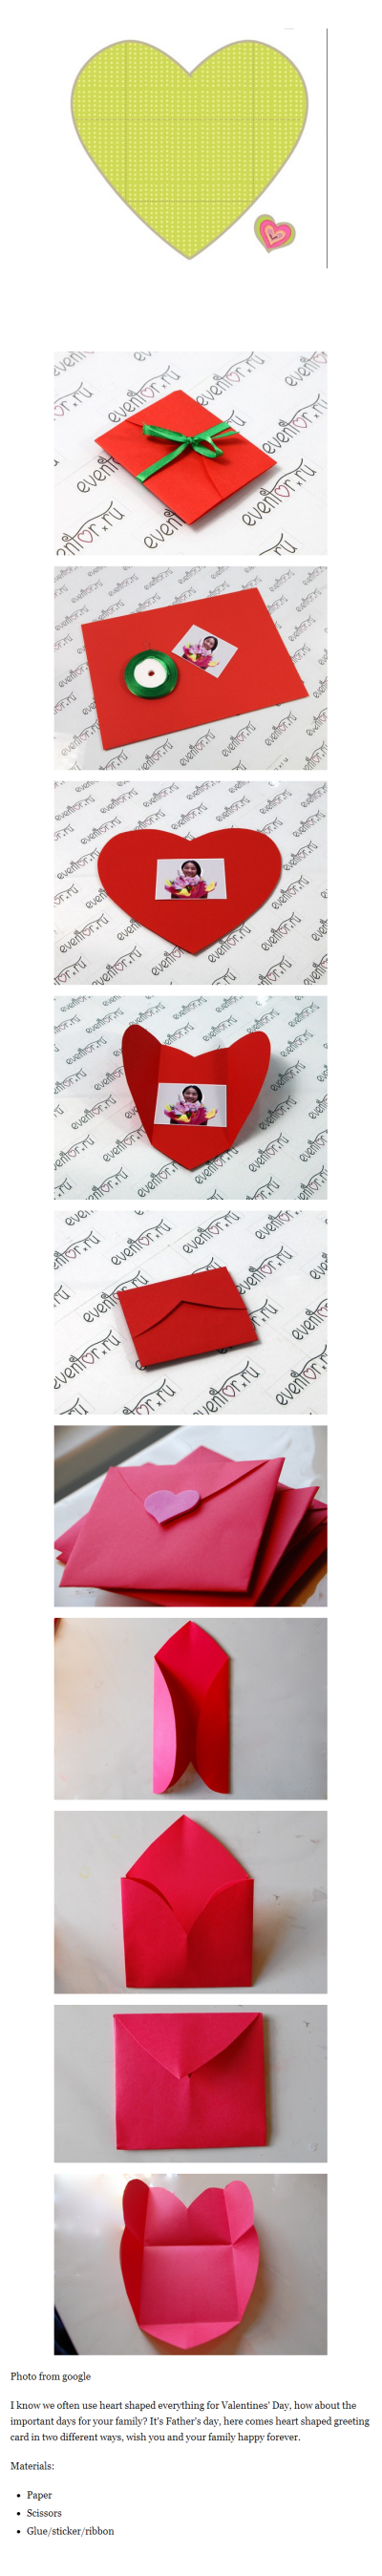 How to Make Heart Shaped Greeting Card in 2 Ways1.纸2.剪刀3.胶水、贴纸、缎带